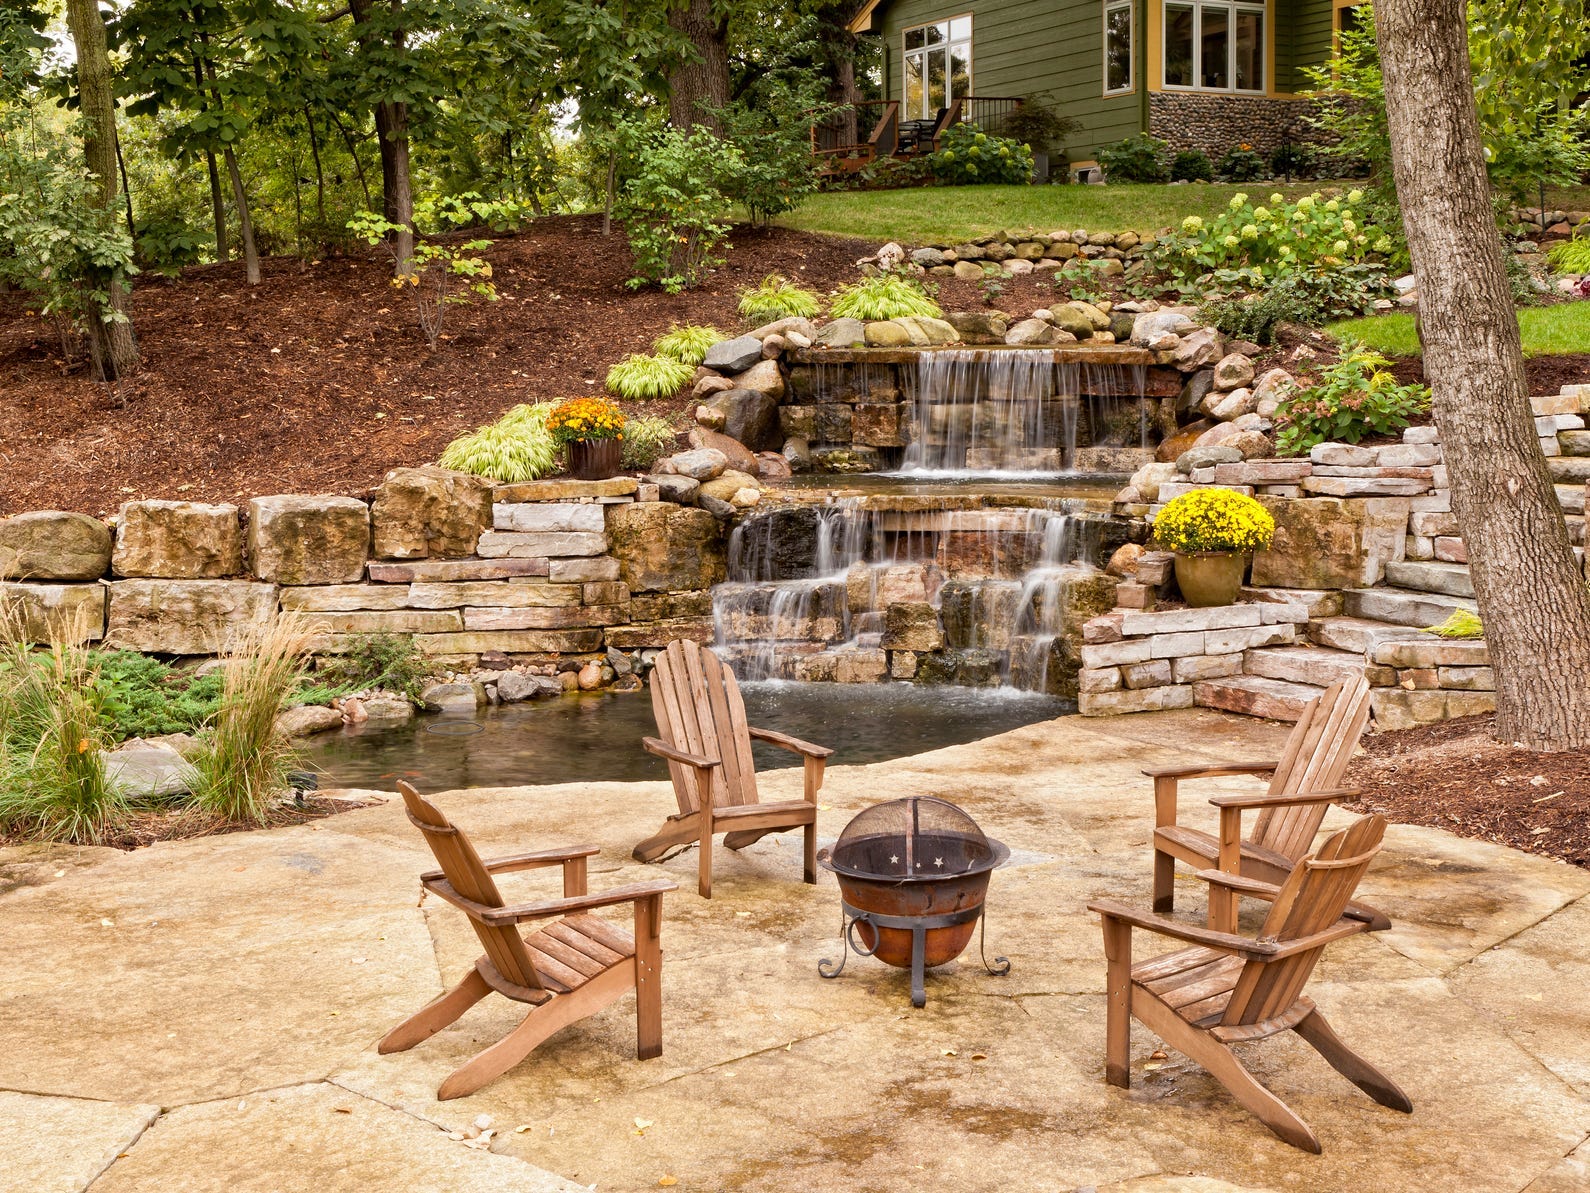 A large backyard with a stonework waterfall and a small portable fire pit surrounded by Adirondack chairs